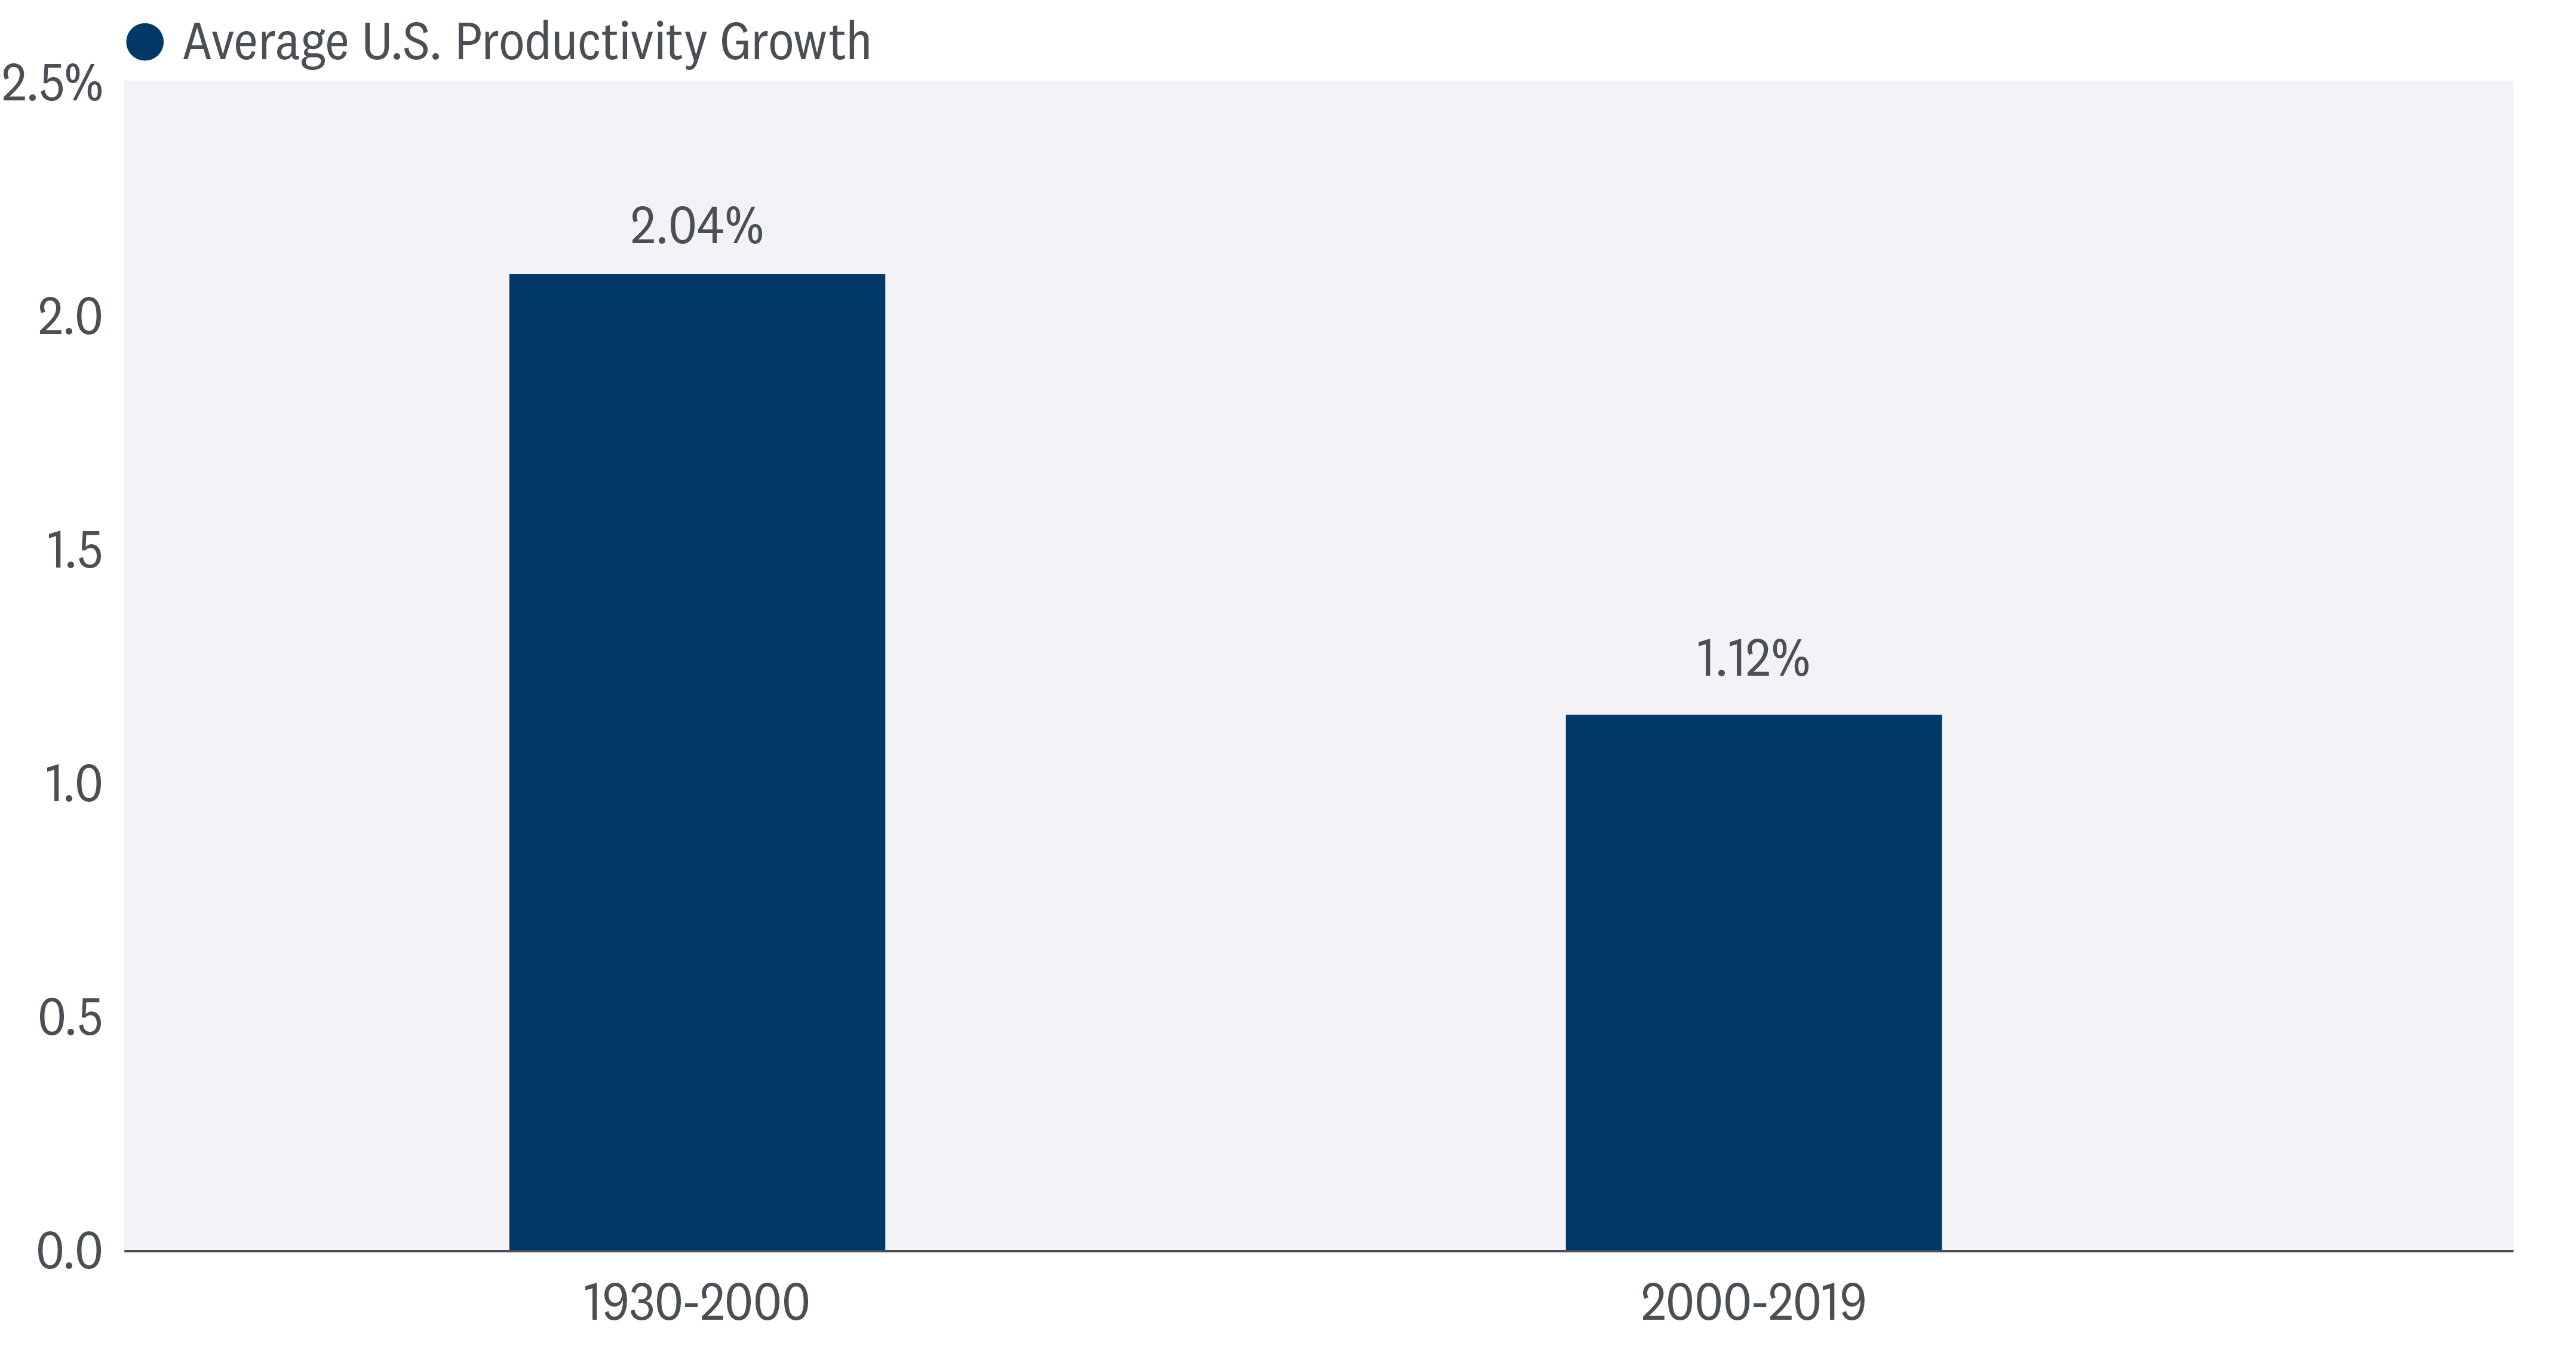 Bar graph of the average U.S. productivity growth from 1930-2000 on one bar and 2000-2019 on another. 